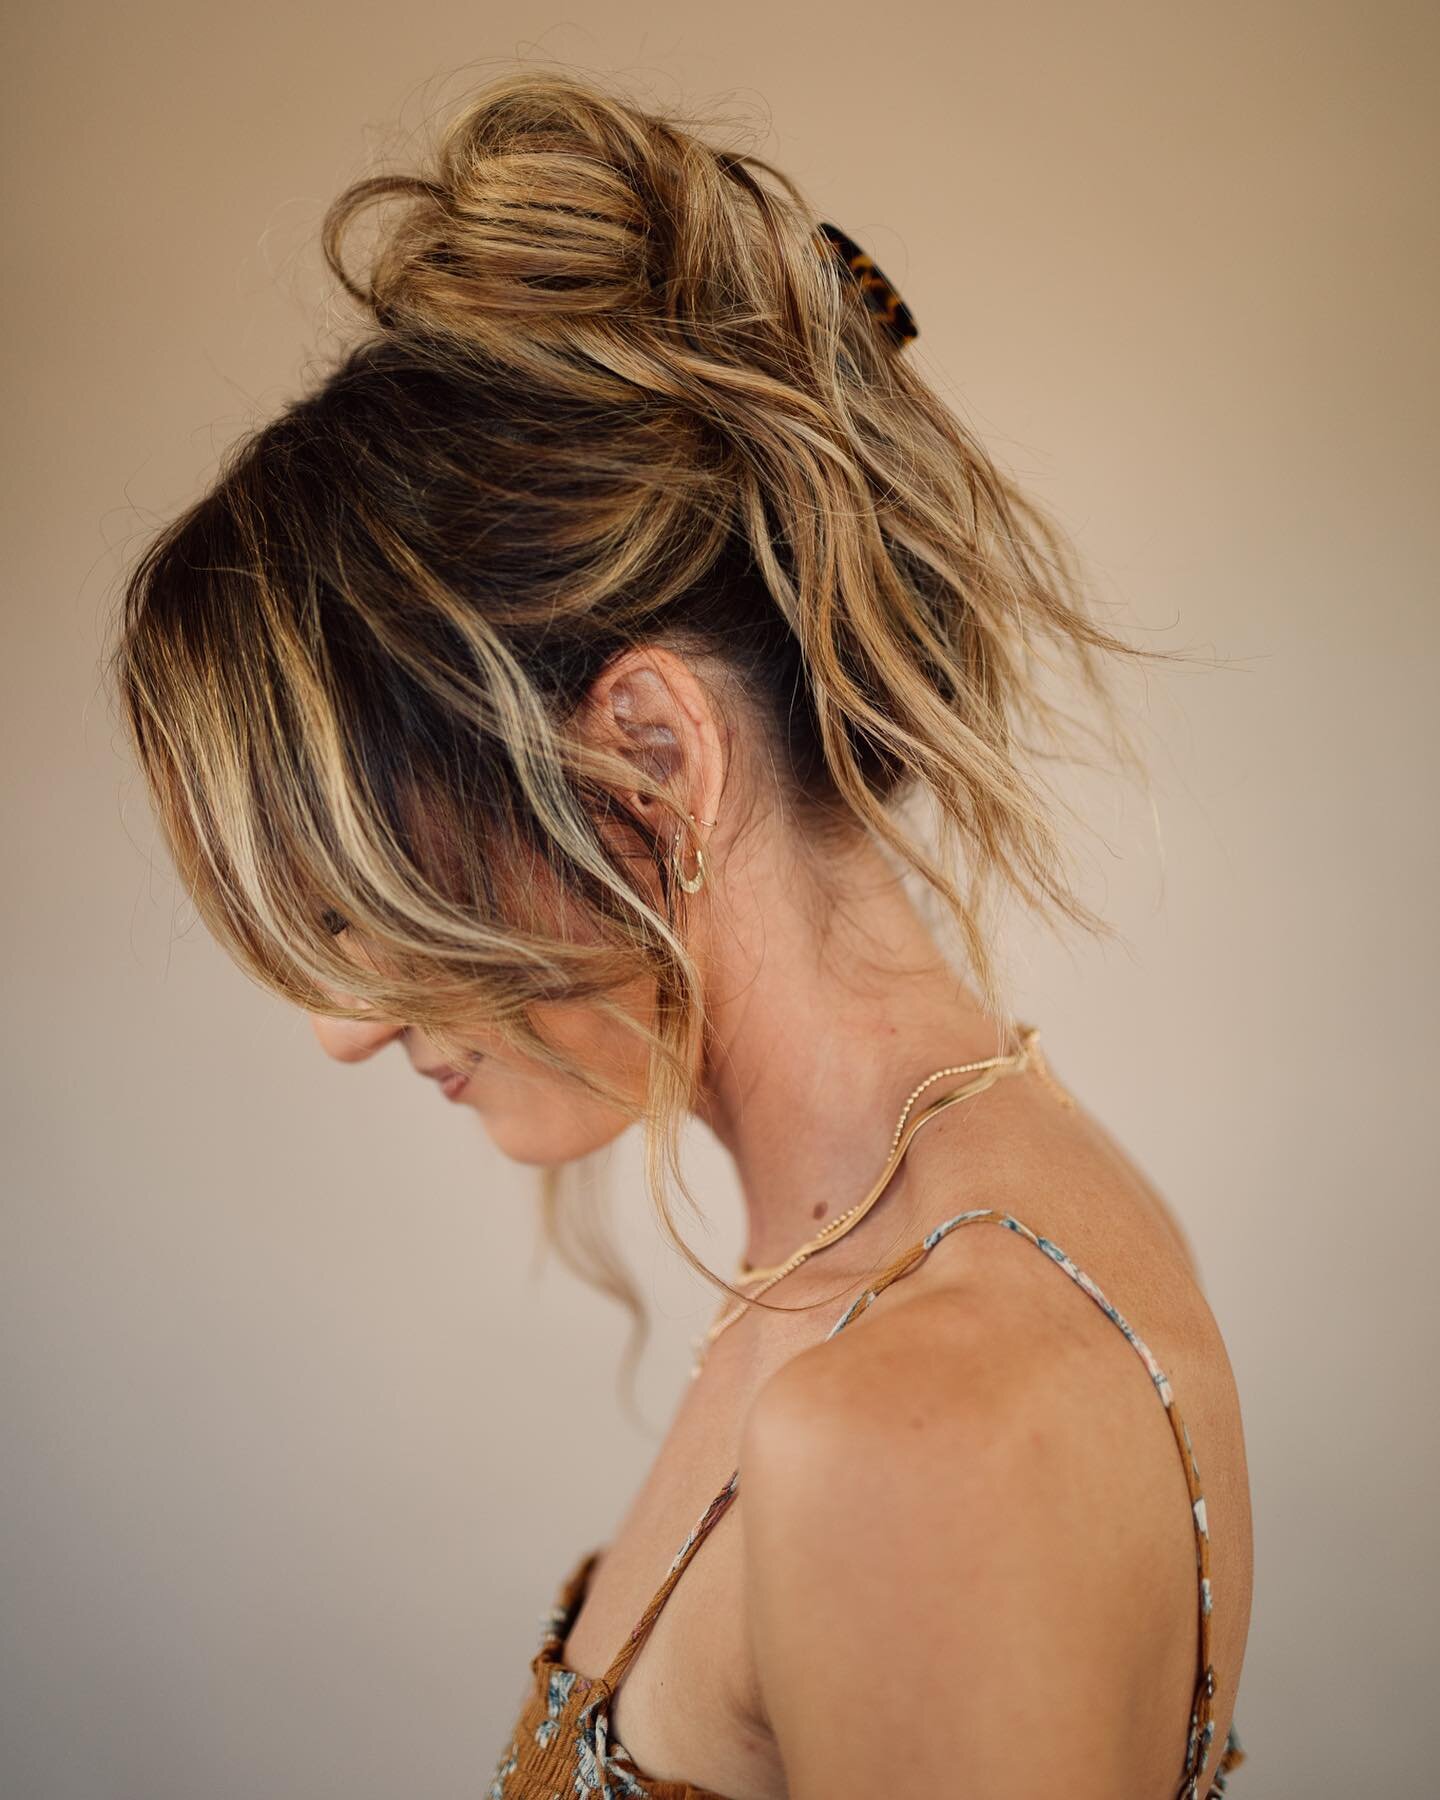 The perfect low maintenance look. Just twist, clip and go! For me the messier the better ✨ 
Photos by @taliapashey 
Jewelry by @pasheybella 
#hairstyles #hairstyleinspo #hairclips #hairideas #beyondtheponytail #updo #updohairstyles #mauisalon #mauiha